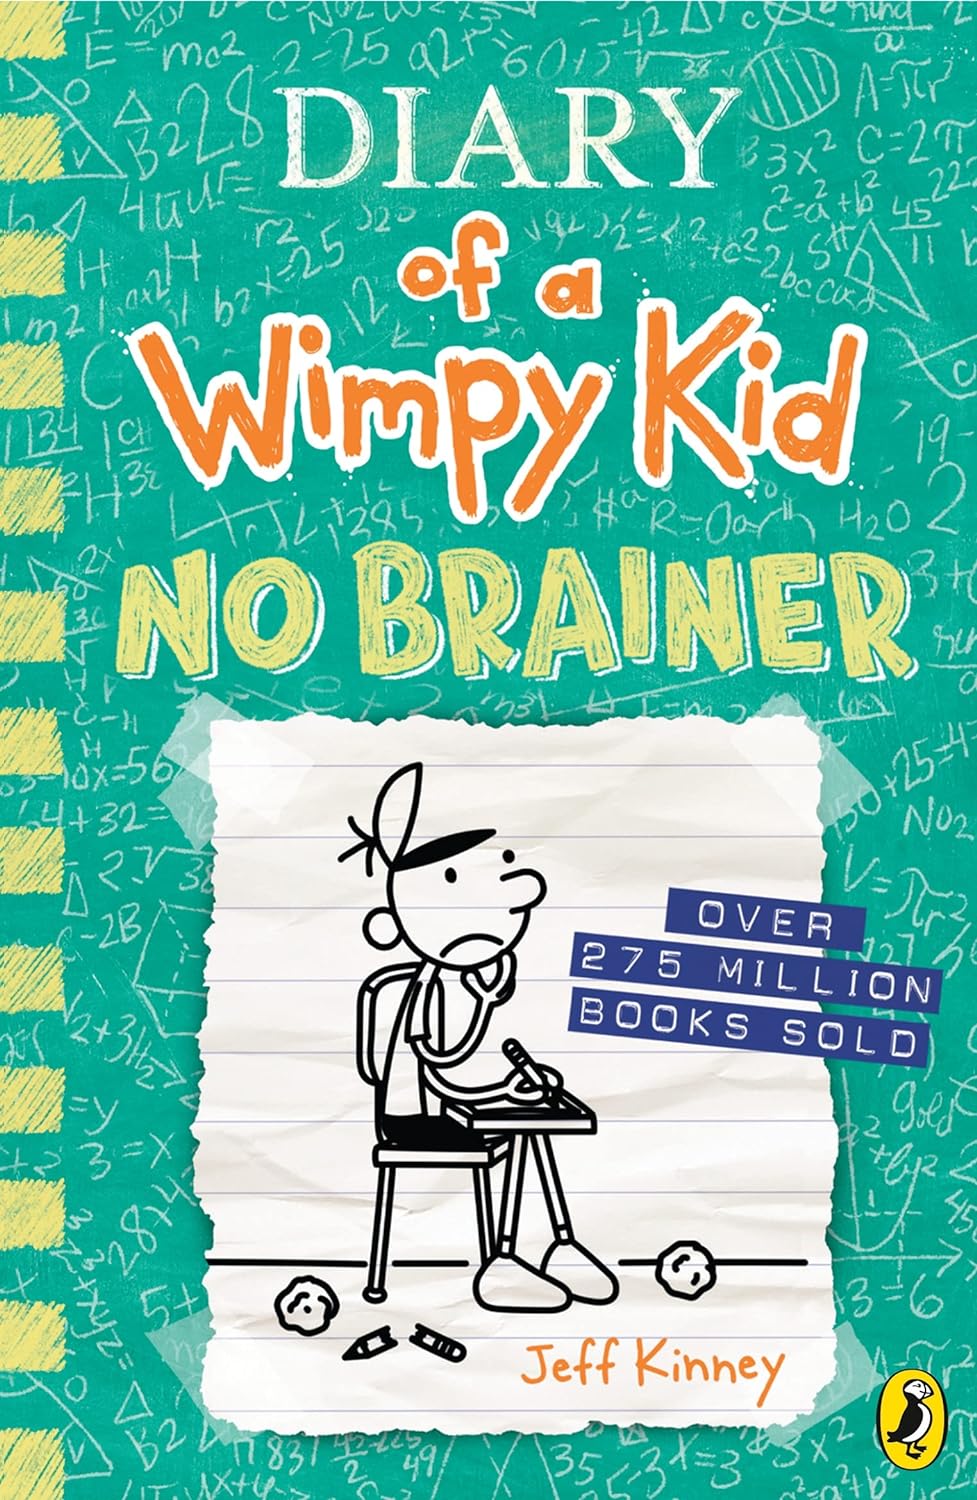 Brainer　Hardcover　A　Diary　Kid:　No　(Book　2023　18)　–　24　October　Of　Wimpy